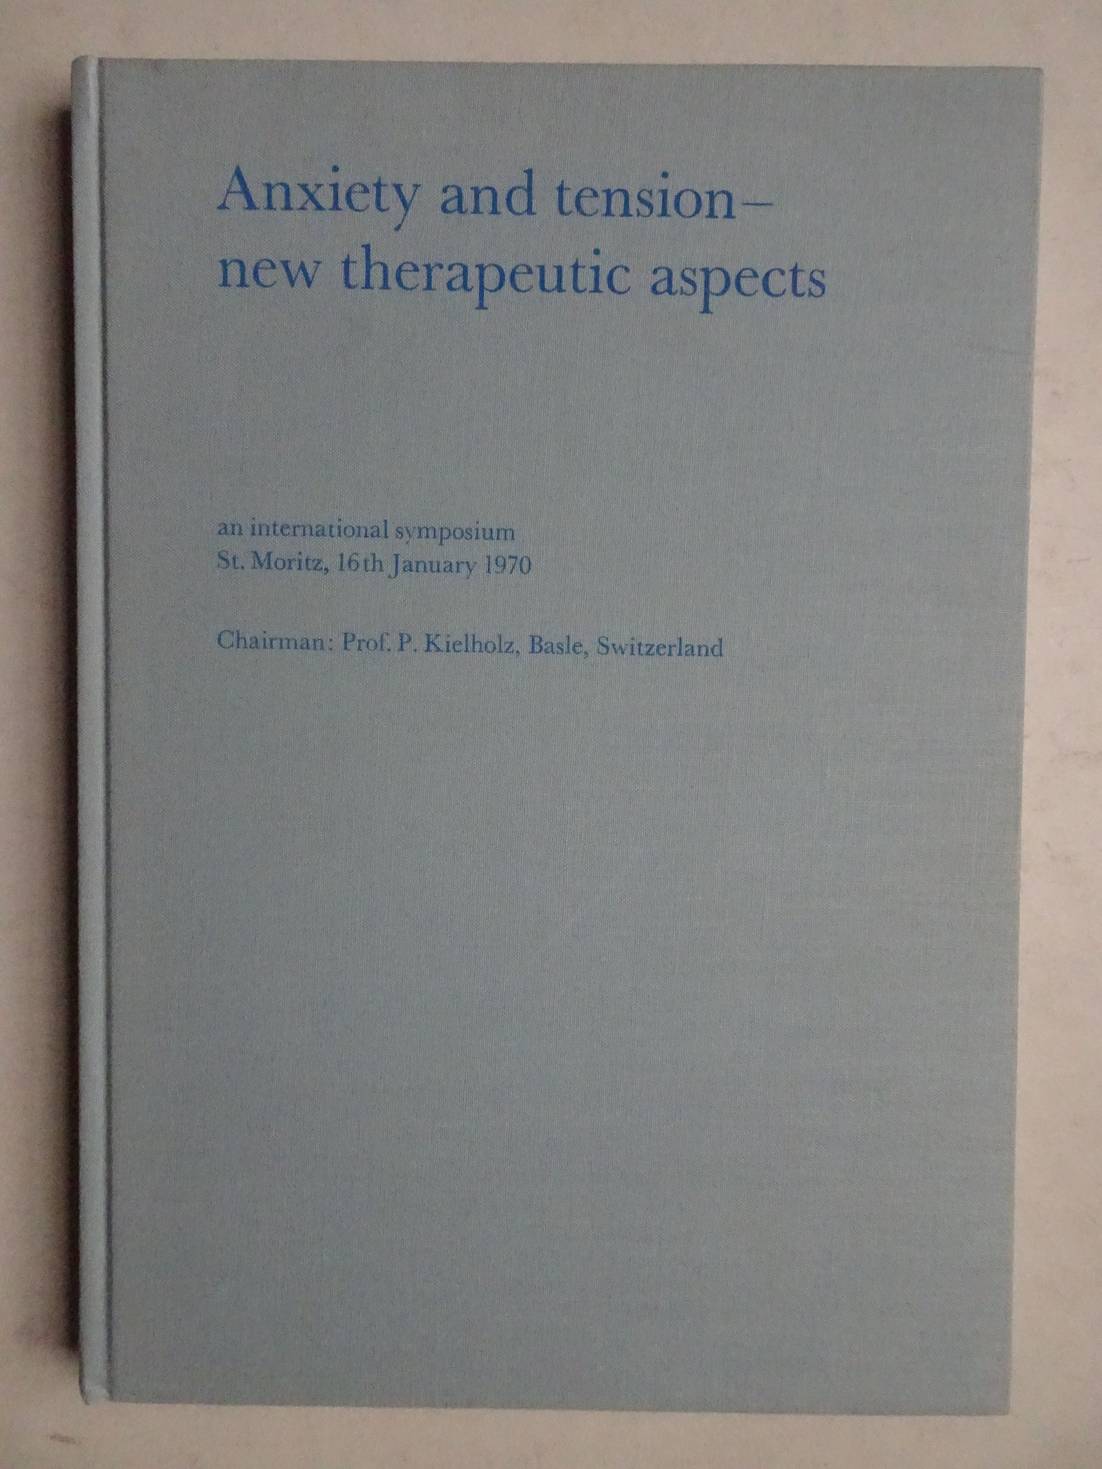 Var. authors. - Anxiety and tension- new therapeutic aspects. An international symposium, St. Moritz, 16th January 1970.